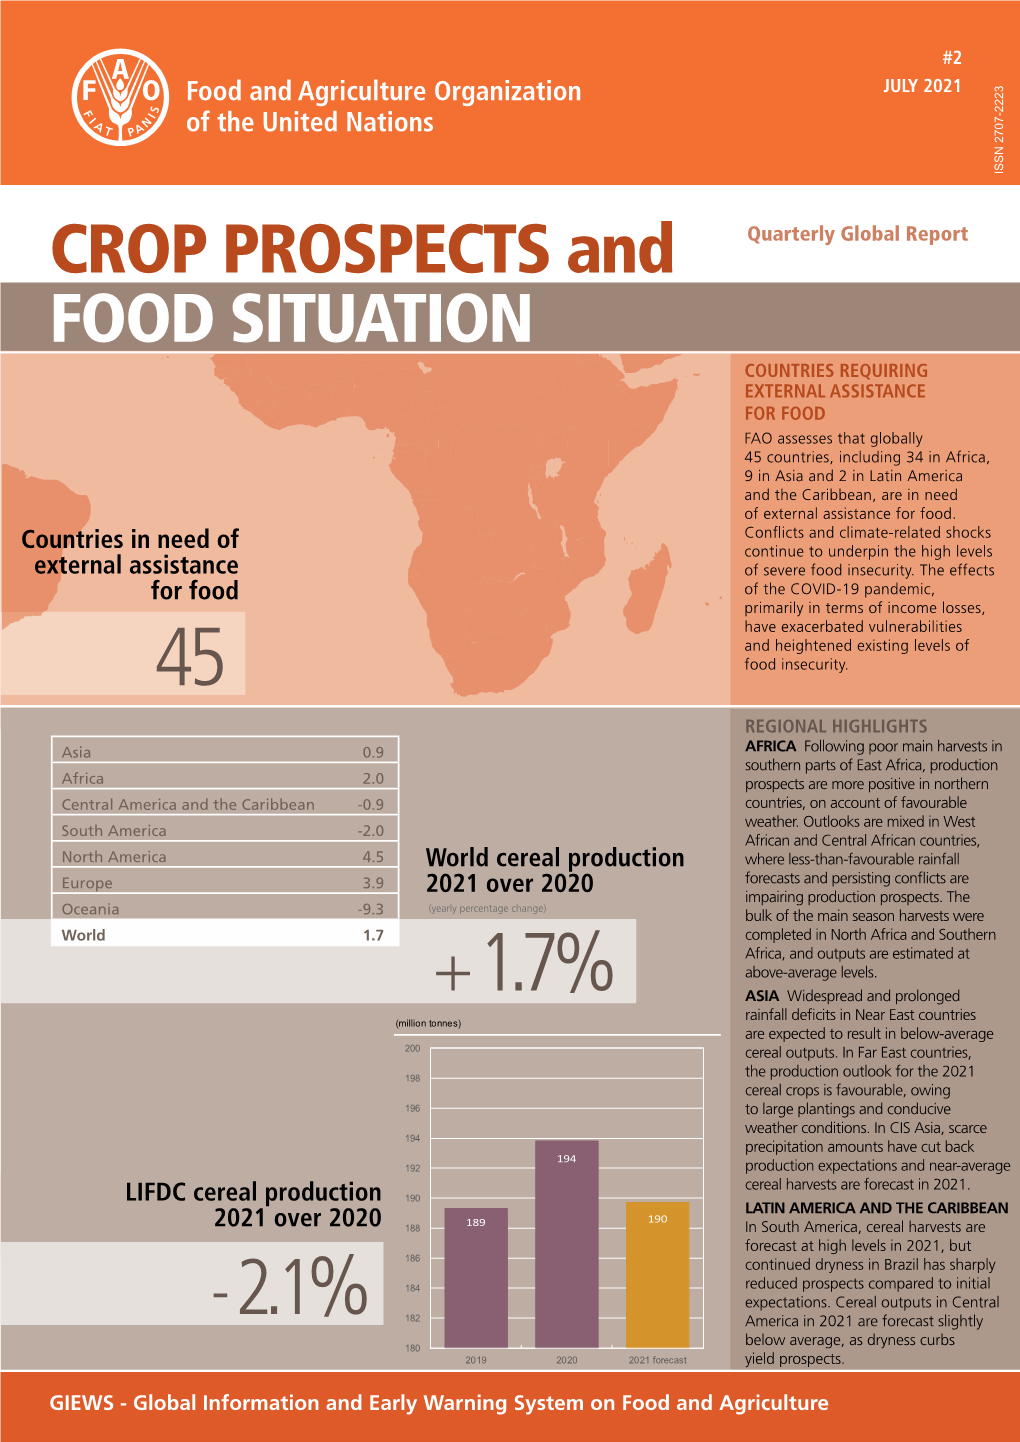 Crop Prospects and Food Situation #2, July 2021